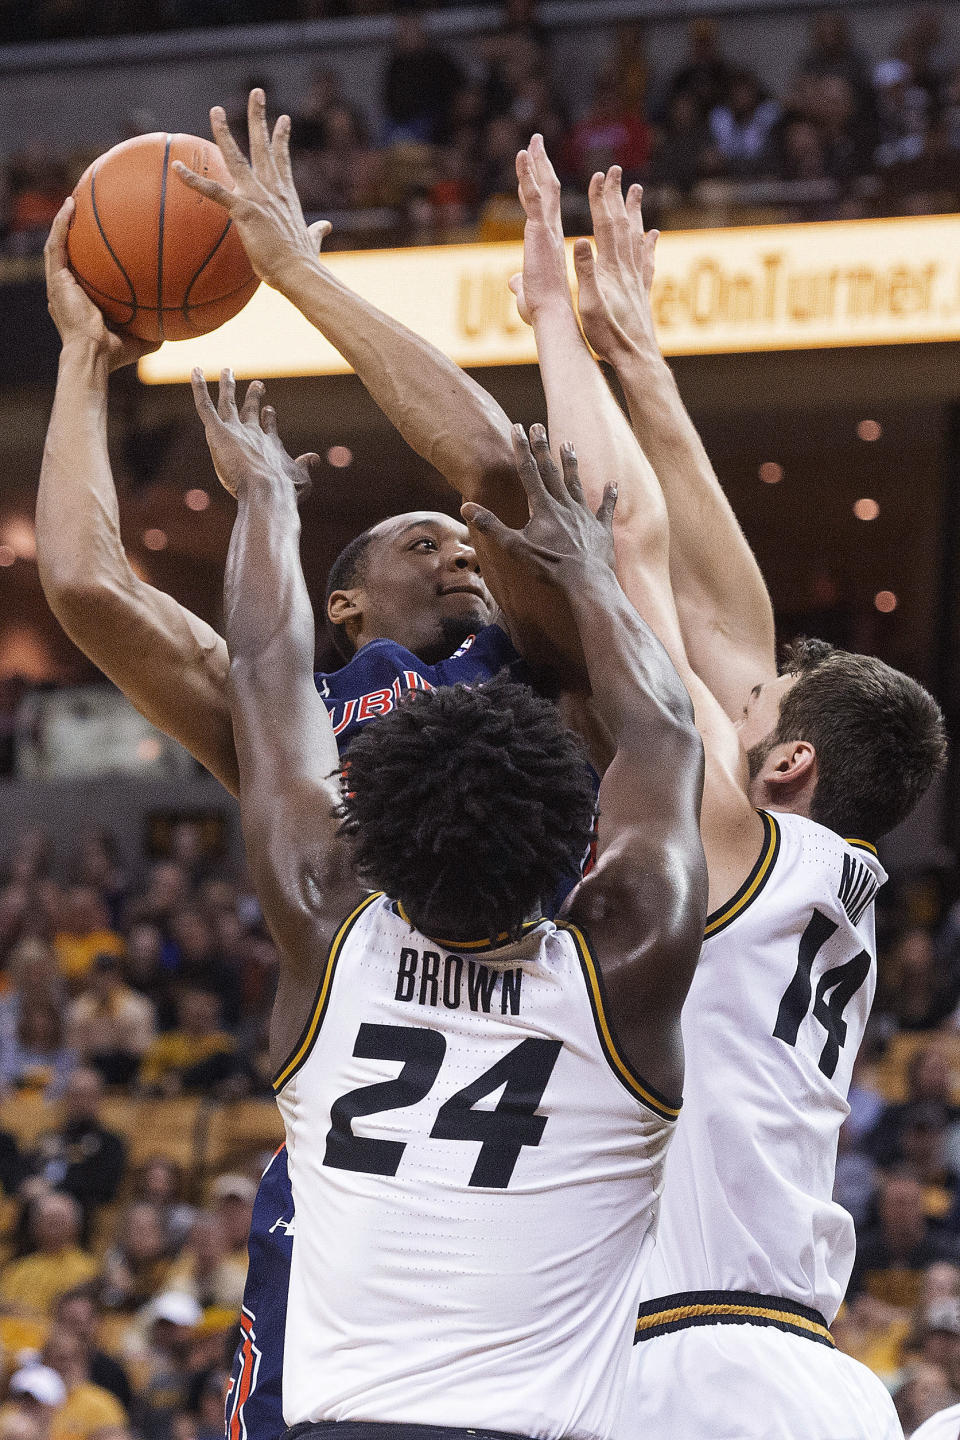 Auburn's Austin Wiley, top, shoots over Missouri's Reed Nikko, right, and Kobe Brown during the first half of an NCAA college basketball game Saturday, Feb. 15, 2020, in Columbia, Mo. (AP Photo/L.G. Patterson)